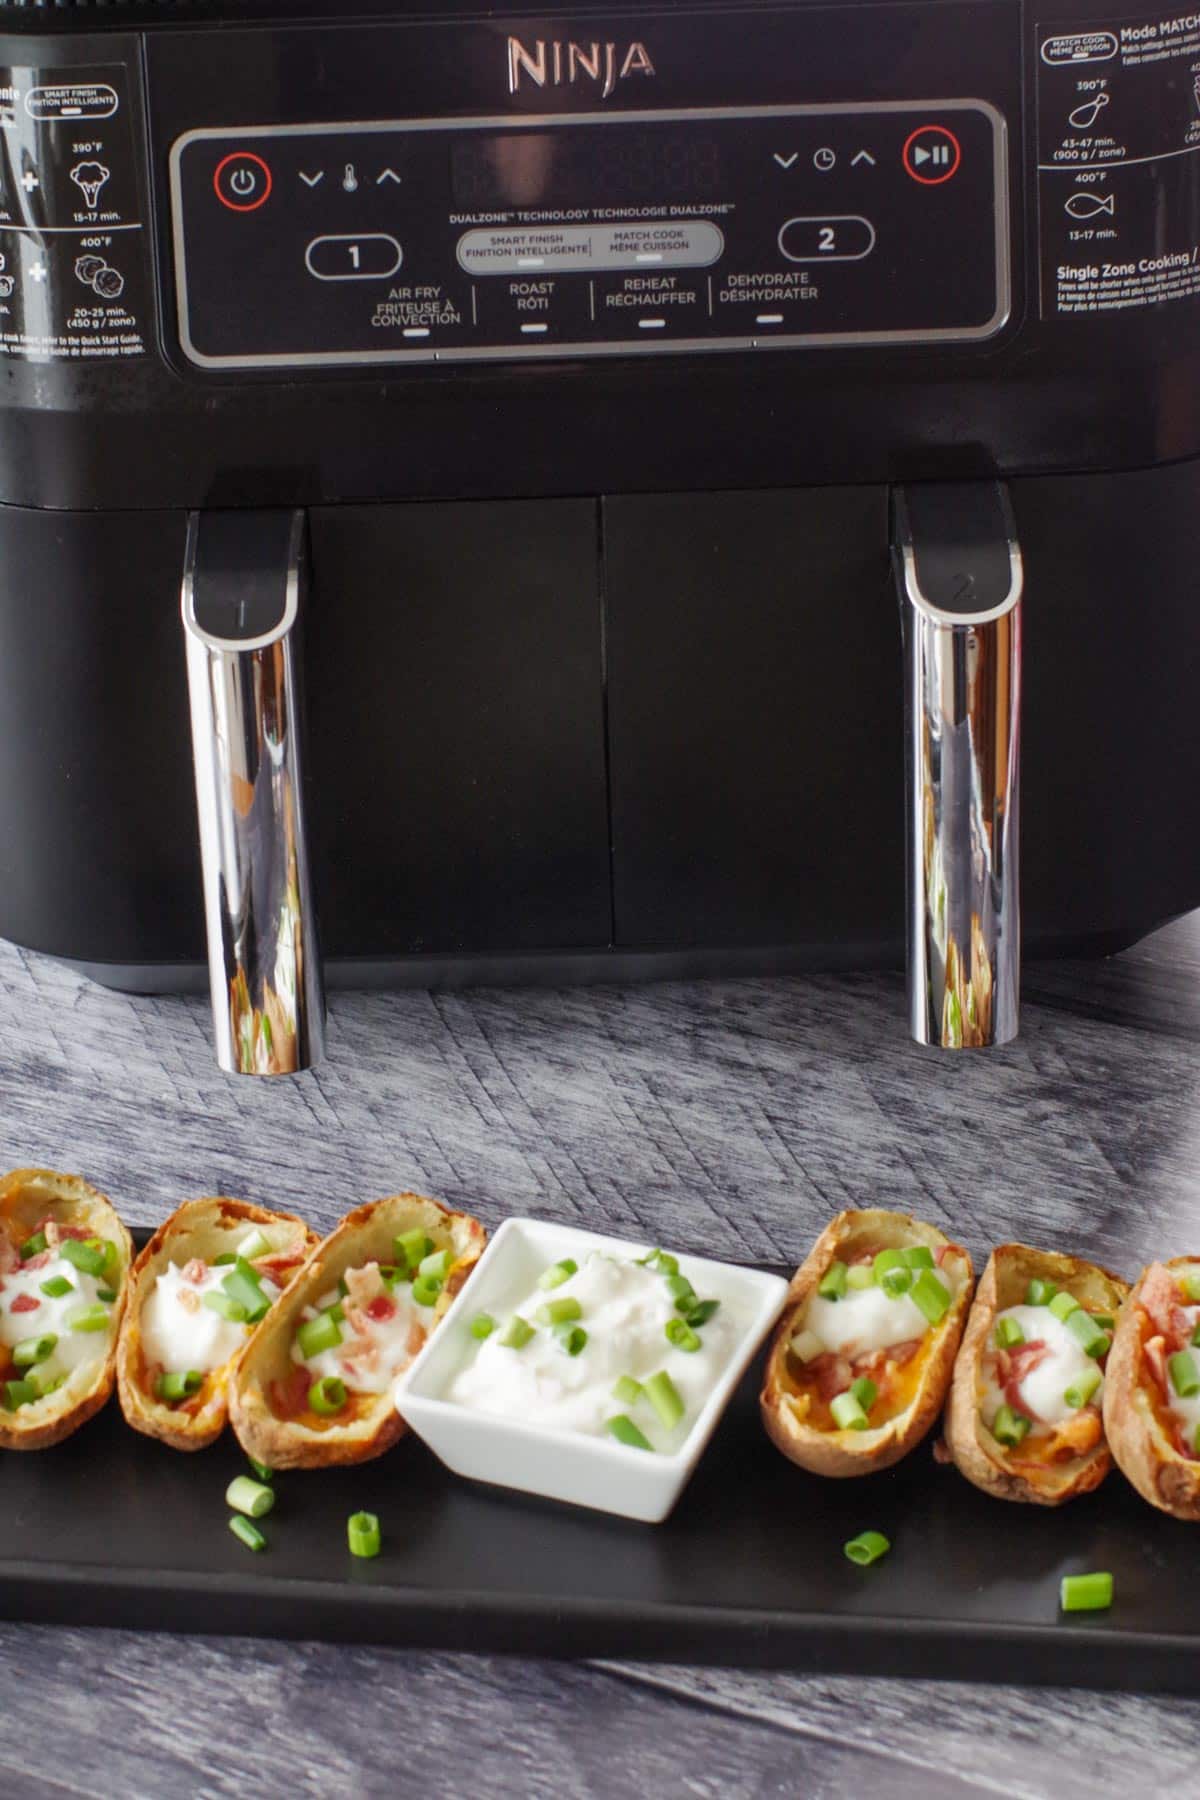 potato skins on a black tray in front of air fryer